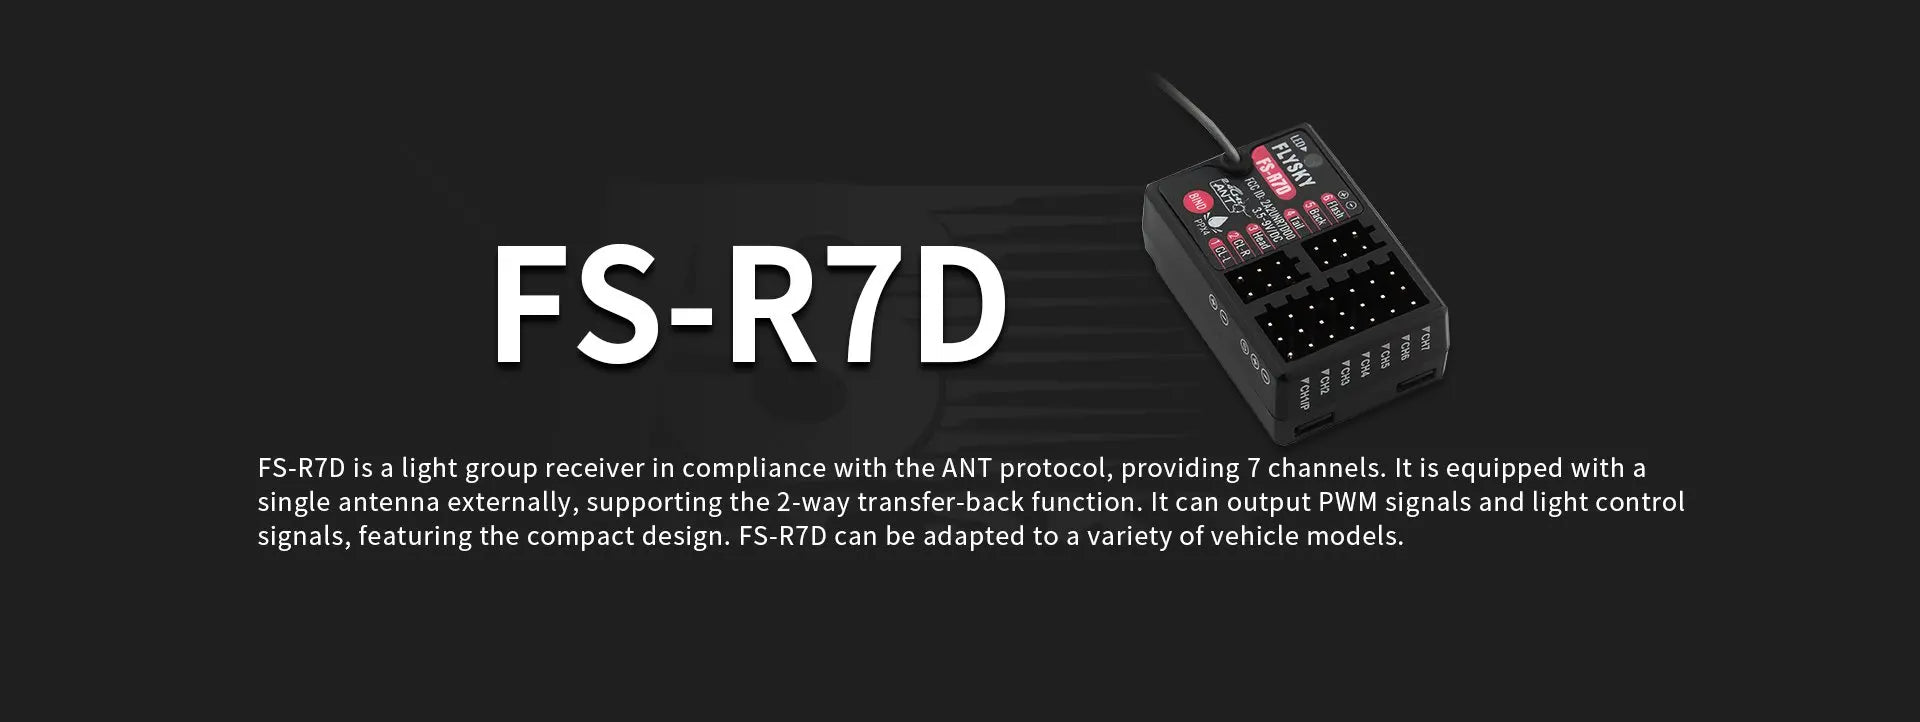 Flysky 2.4G ANT Protocol Receiver, FS-R7D can be adapted to a variety of vehicle models .